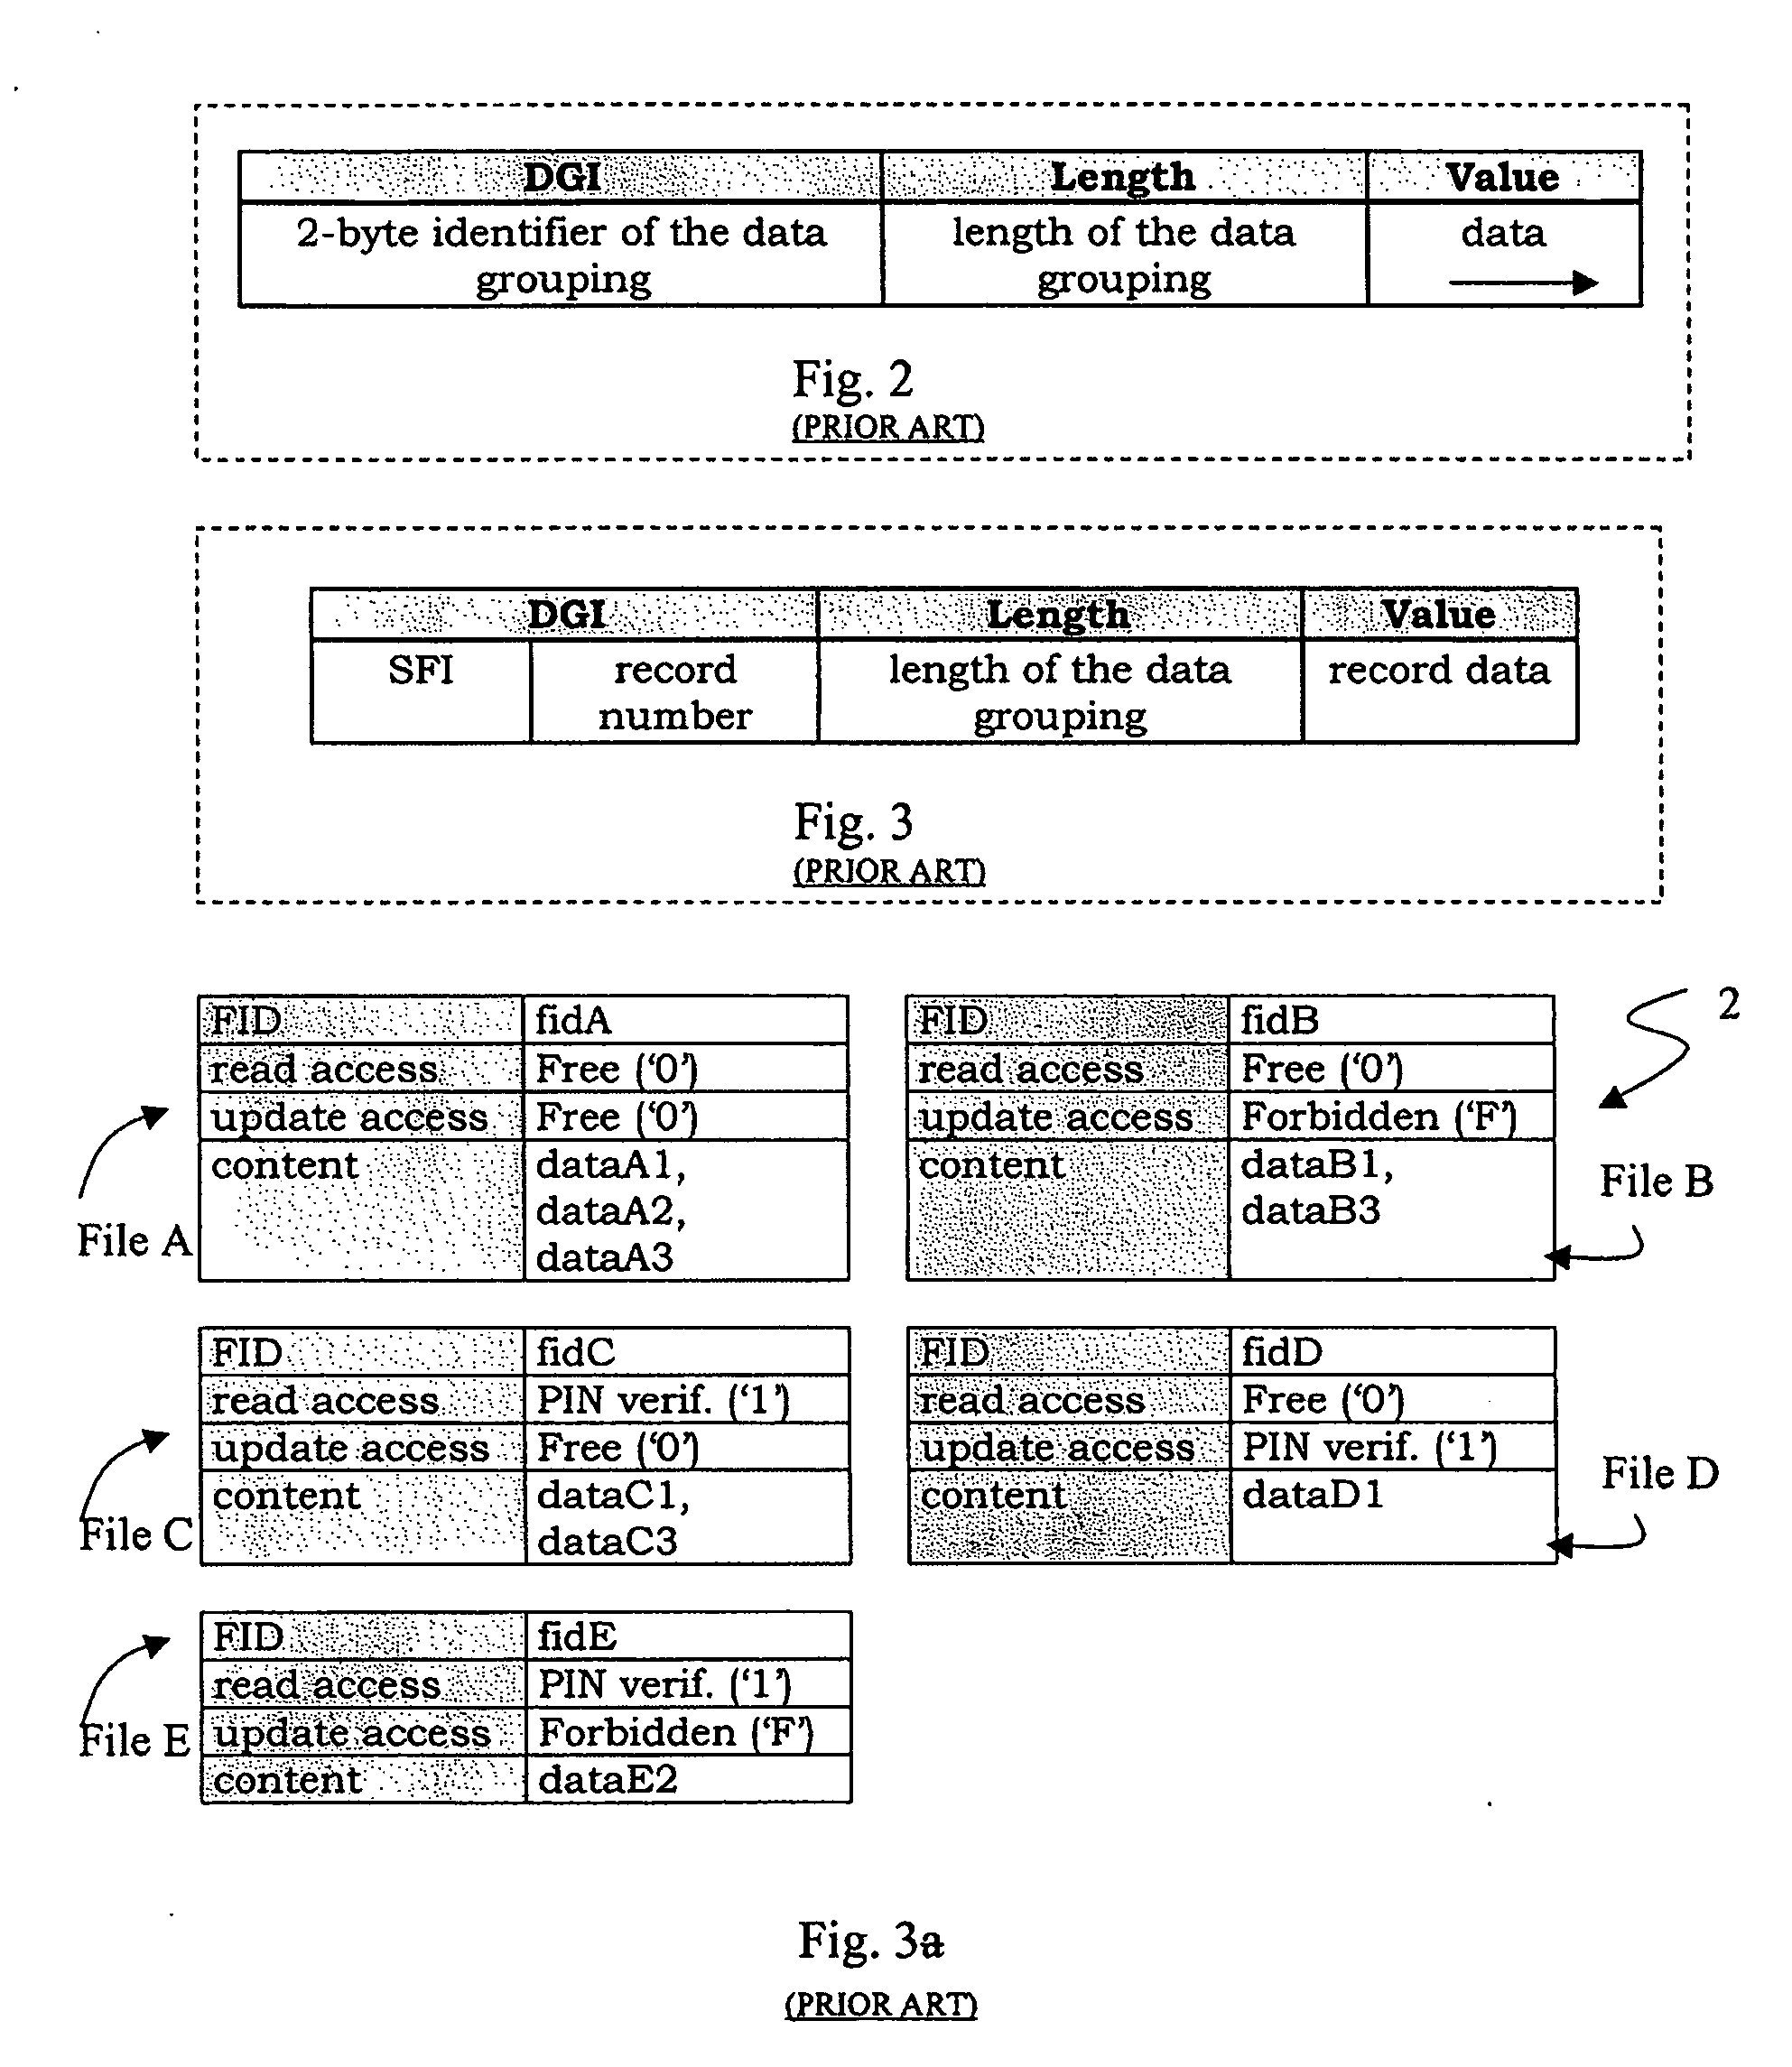 Method for Configuring an IC Card in Order to Receive Personalization Commands